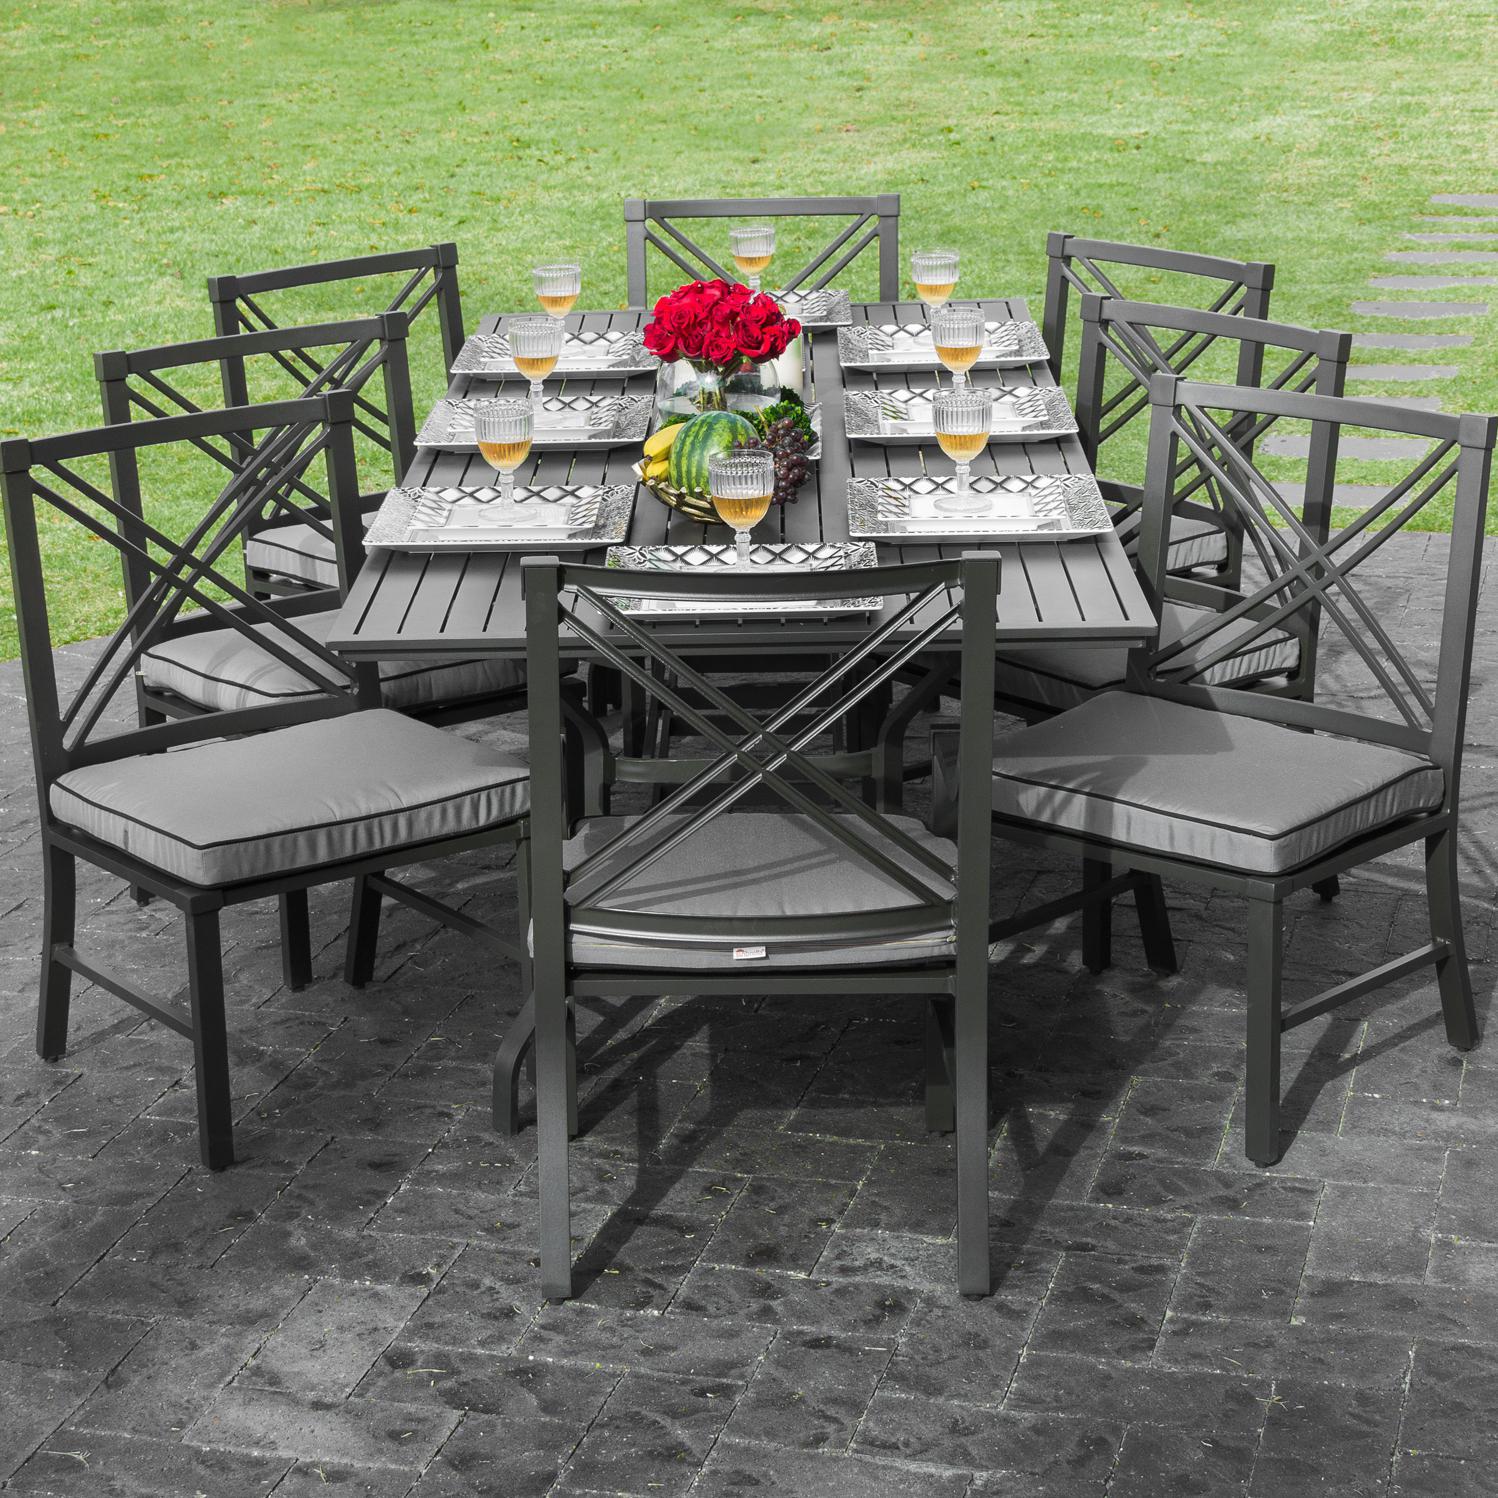 white clearance appealing rope table chair cushions and outdoor set wicker all mesh patio threshold modern dining bunnings chairs rattan target resin black aluminium metal grey